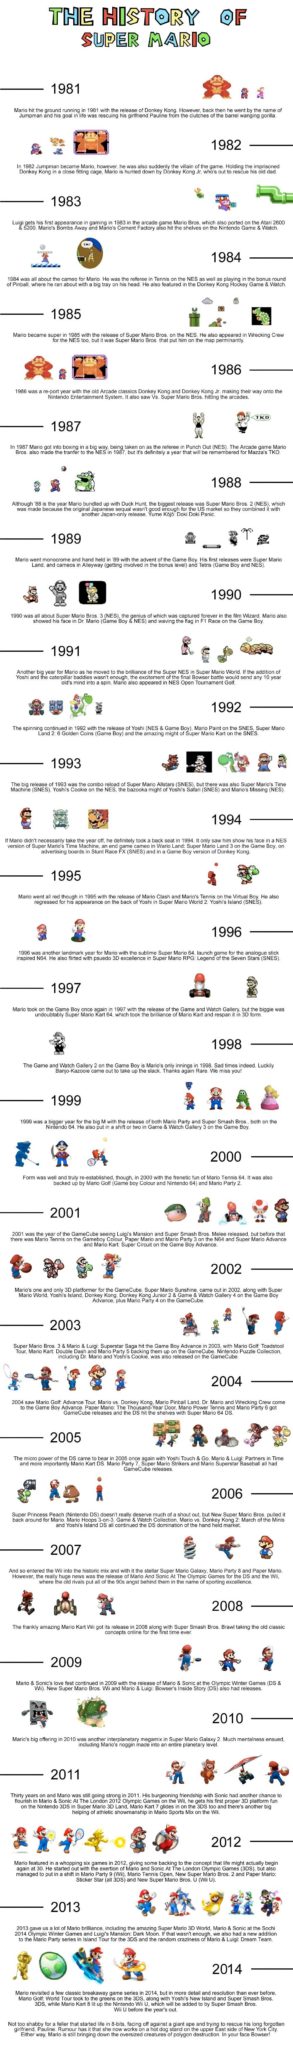 The history of Super Mario infographic